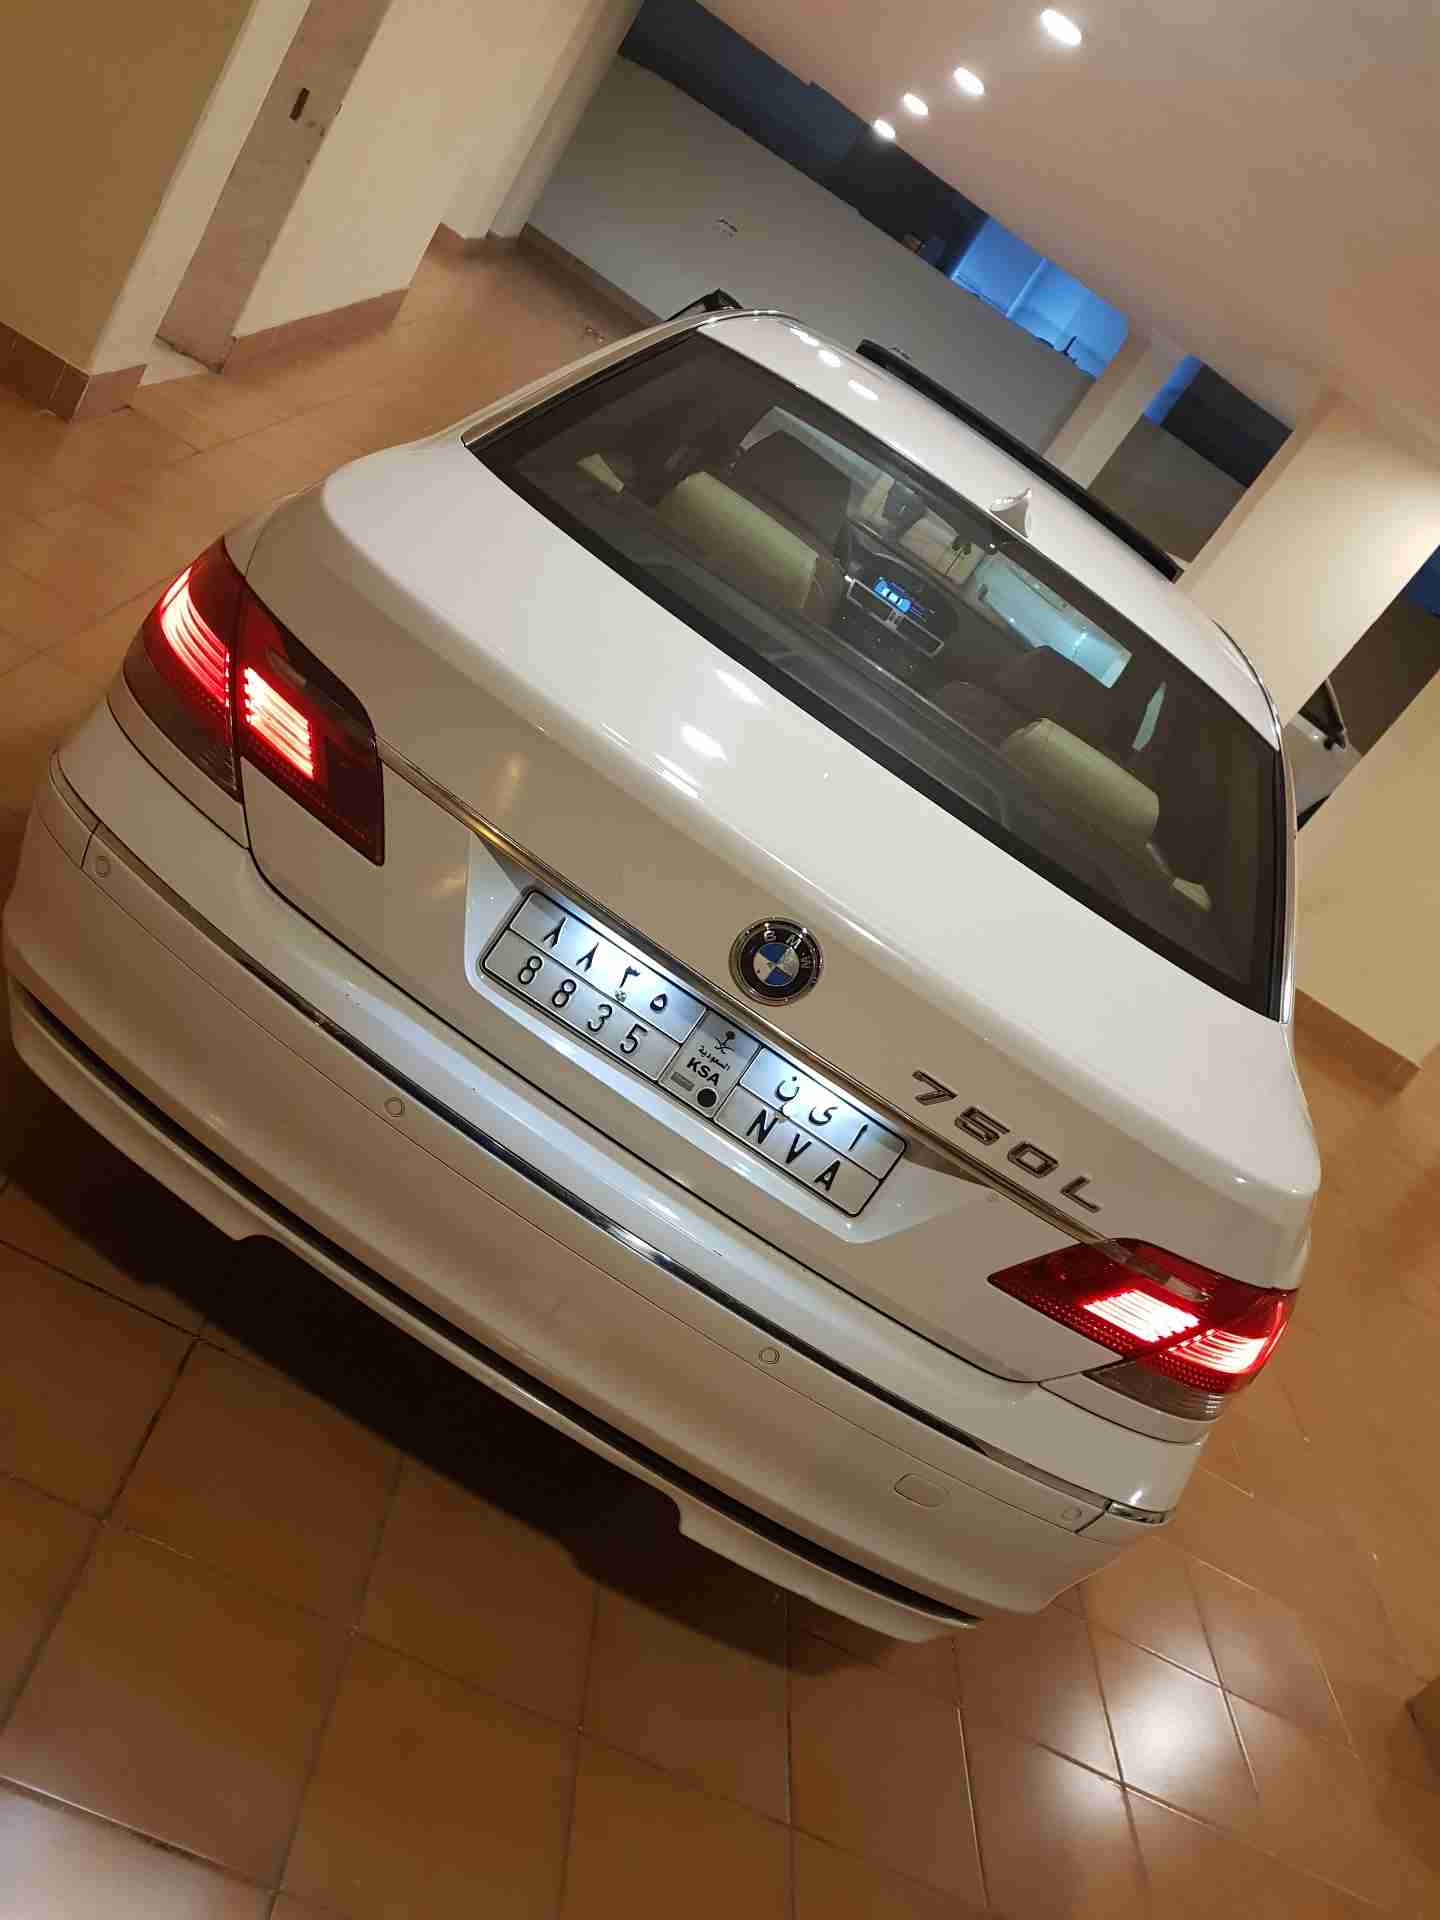 I use the car personally, and i bought it new few month ago. The car is still in Perfect condition, Full option and in good shape. Am the first -Owner/Clean LEX-  بي ام دبليو لا تنسَ أنك...